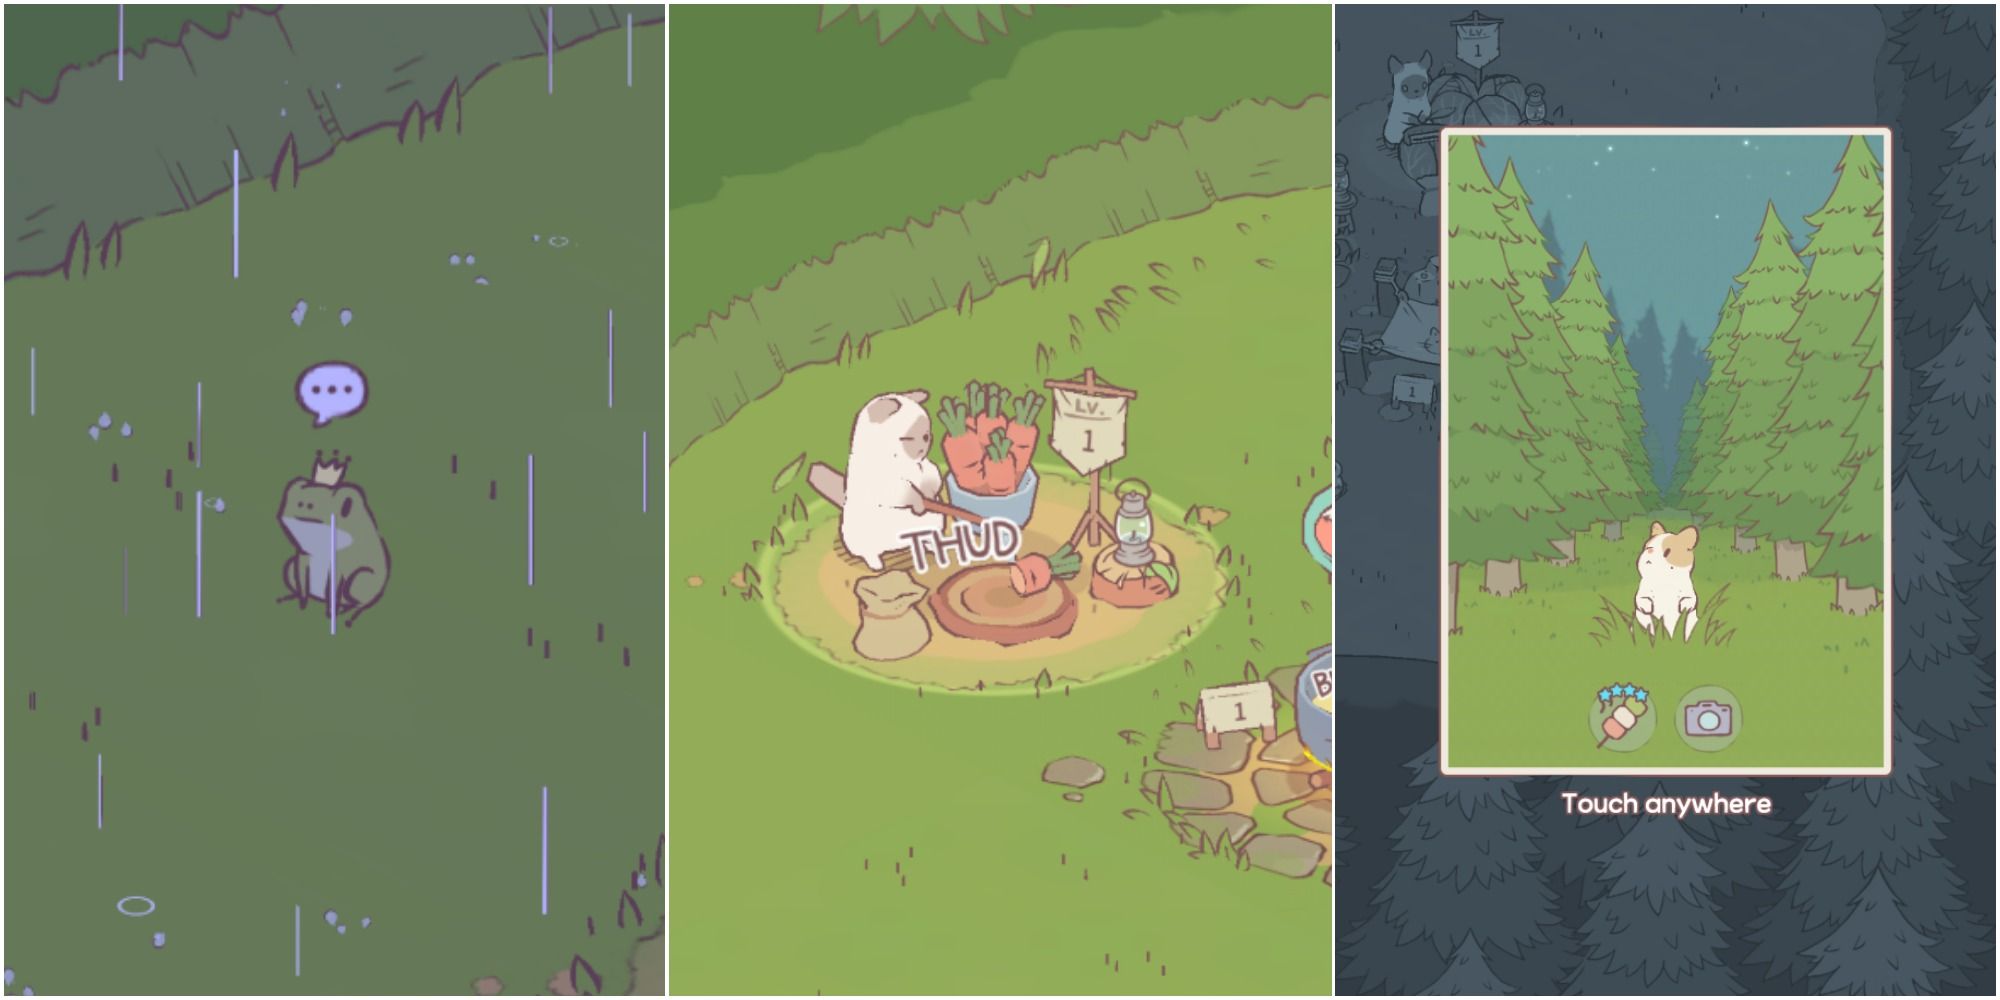 Split image of Frog Prince in raid, a cat chopping carrots at level 1 station, and ginger cat sitting in woods at night